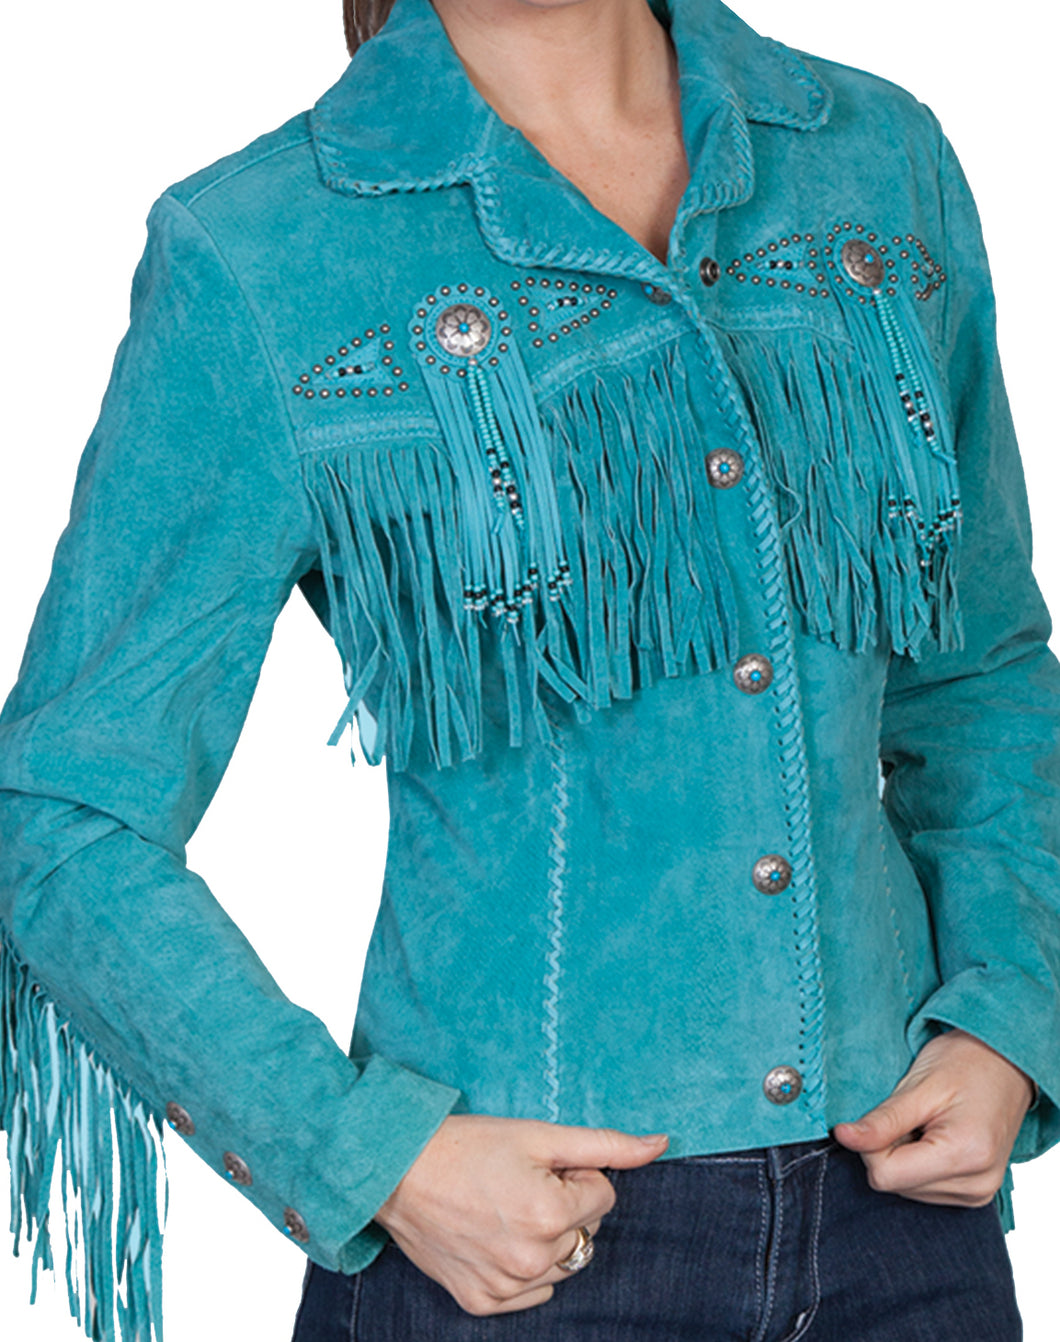 Woman-Wearing-Suede-Leather-Jacket-with-Conchos-and-Fringe-by-Scully-L152